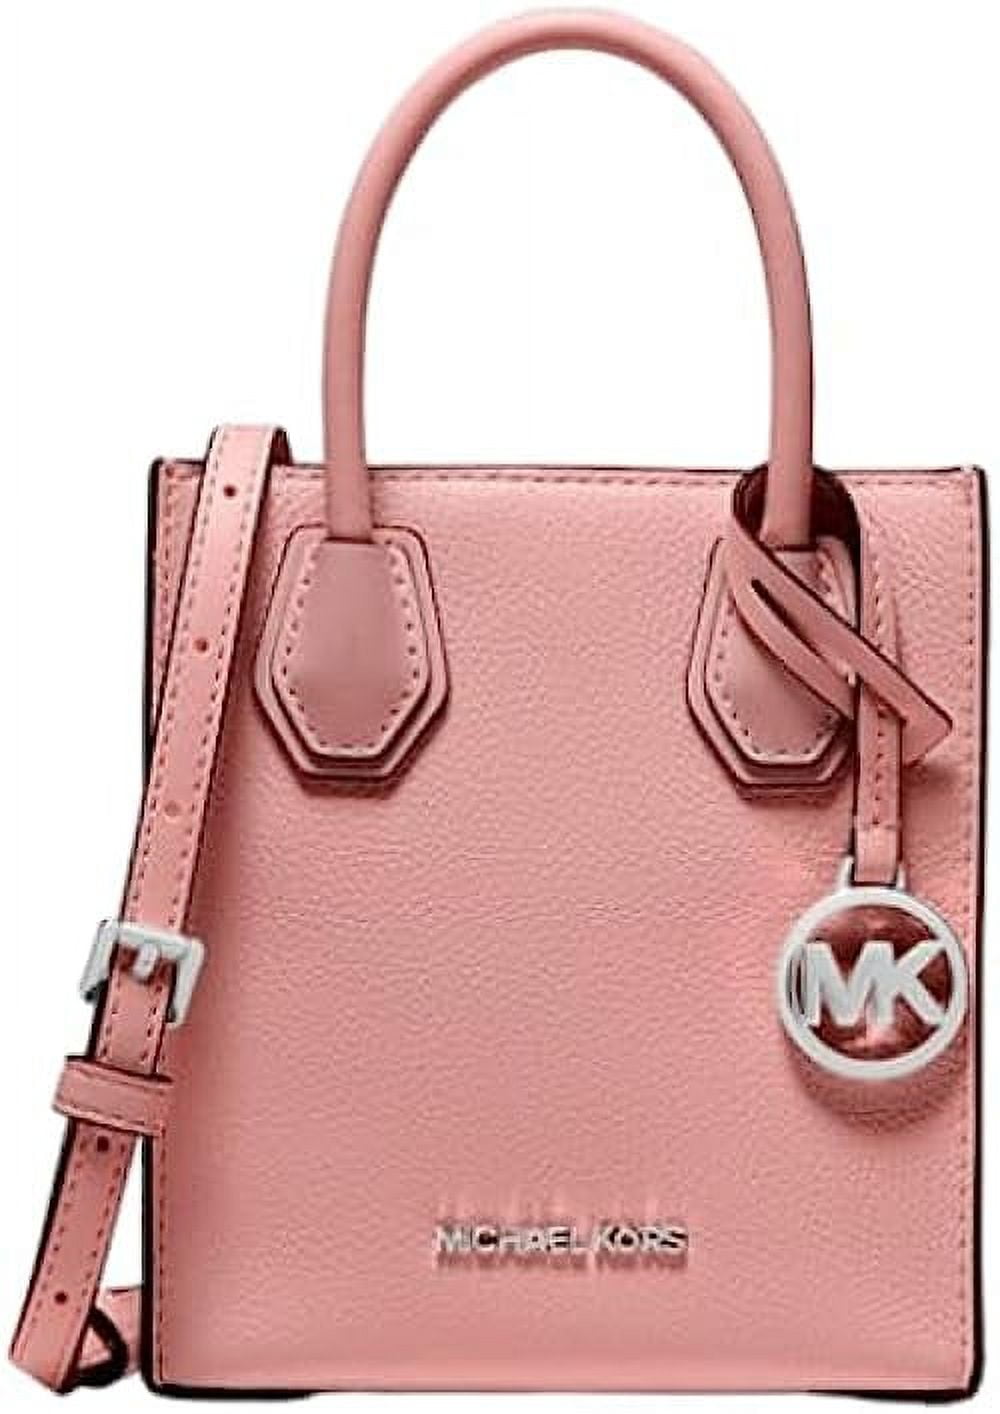 Michael Kors Voyager Purse/Small Laptop Tote, Blush Pink with Pom Pom  Accessory | Laptop tote, Small laptop, Navy handbag